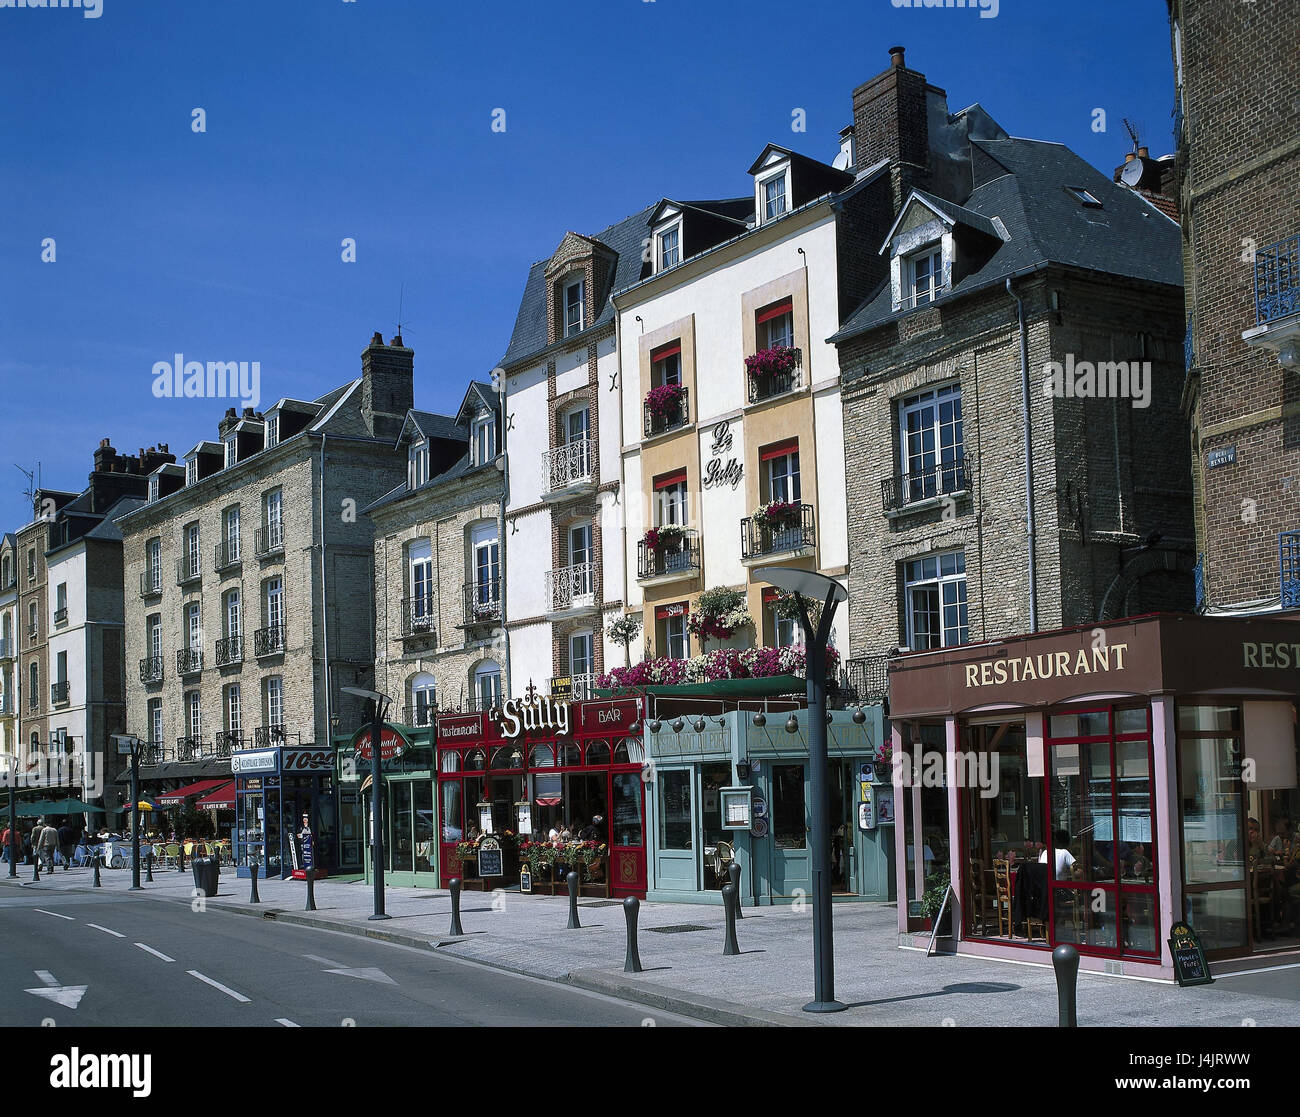 France, Normandy, his-maritime, Dieppe, town view, restaurants outside, town, seaside resort, port, harbour fourth, Atlantic coast, street cafes, street cafe, gastronomy, foreign countries, house line, house facades, facades Stock Photo